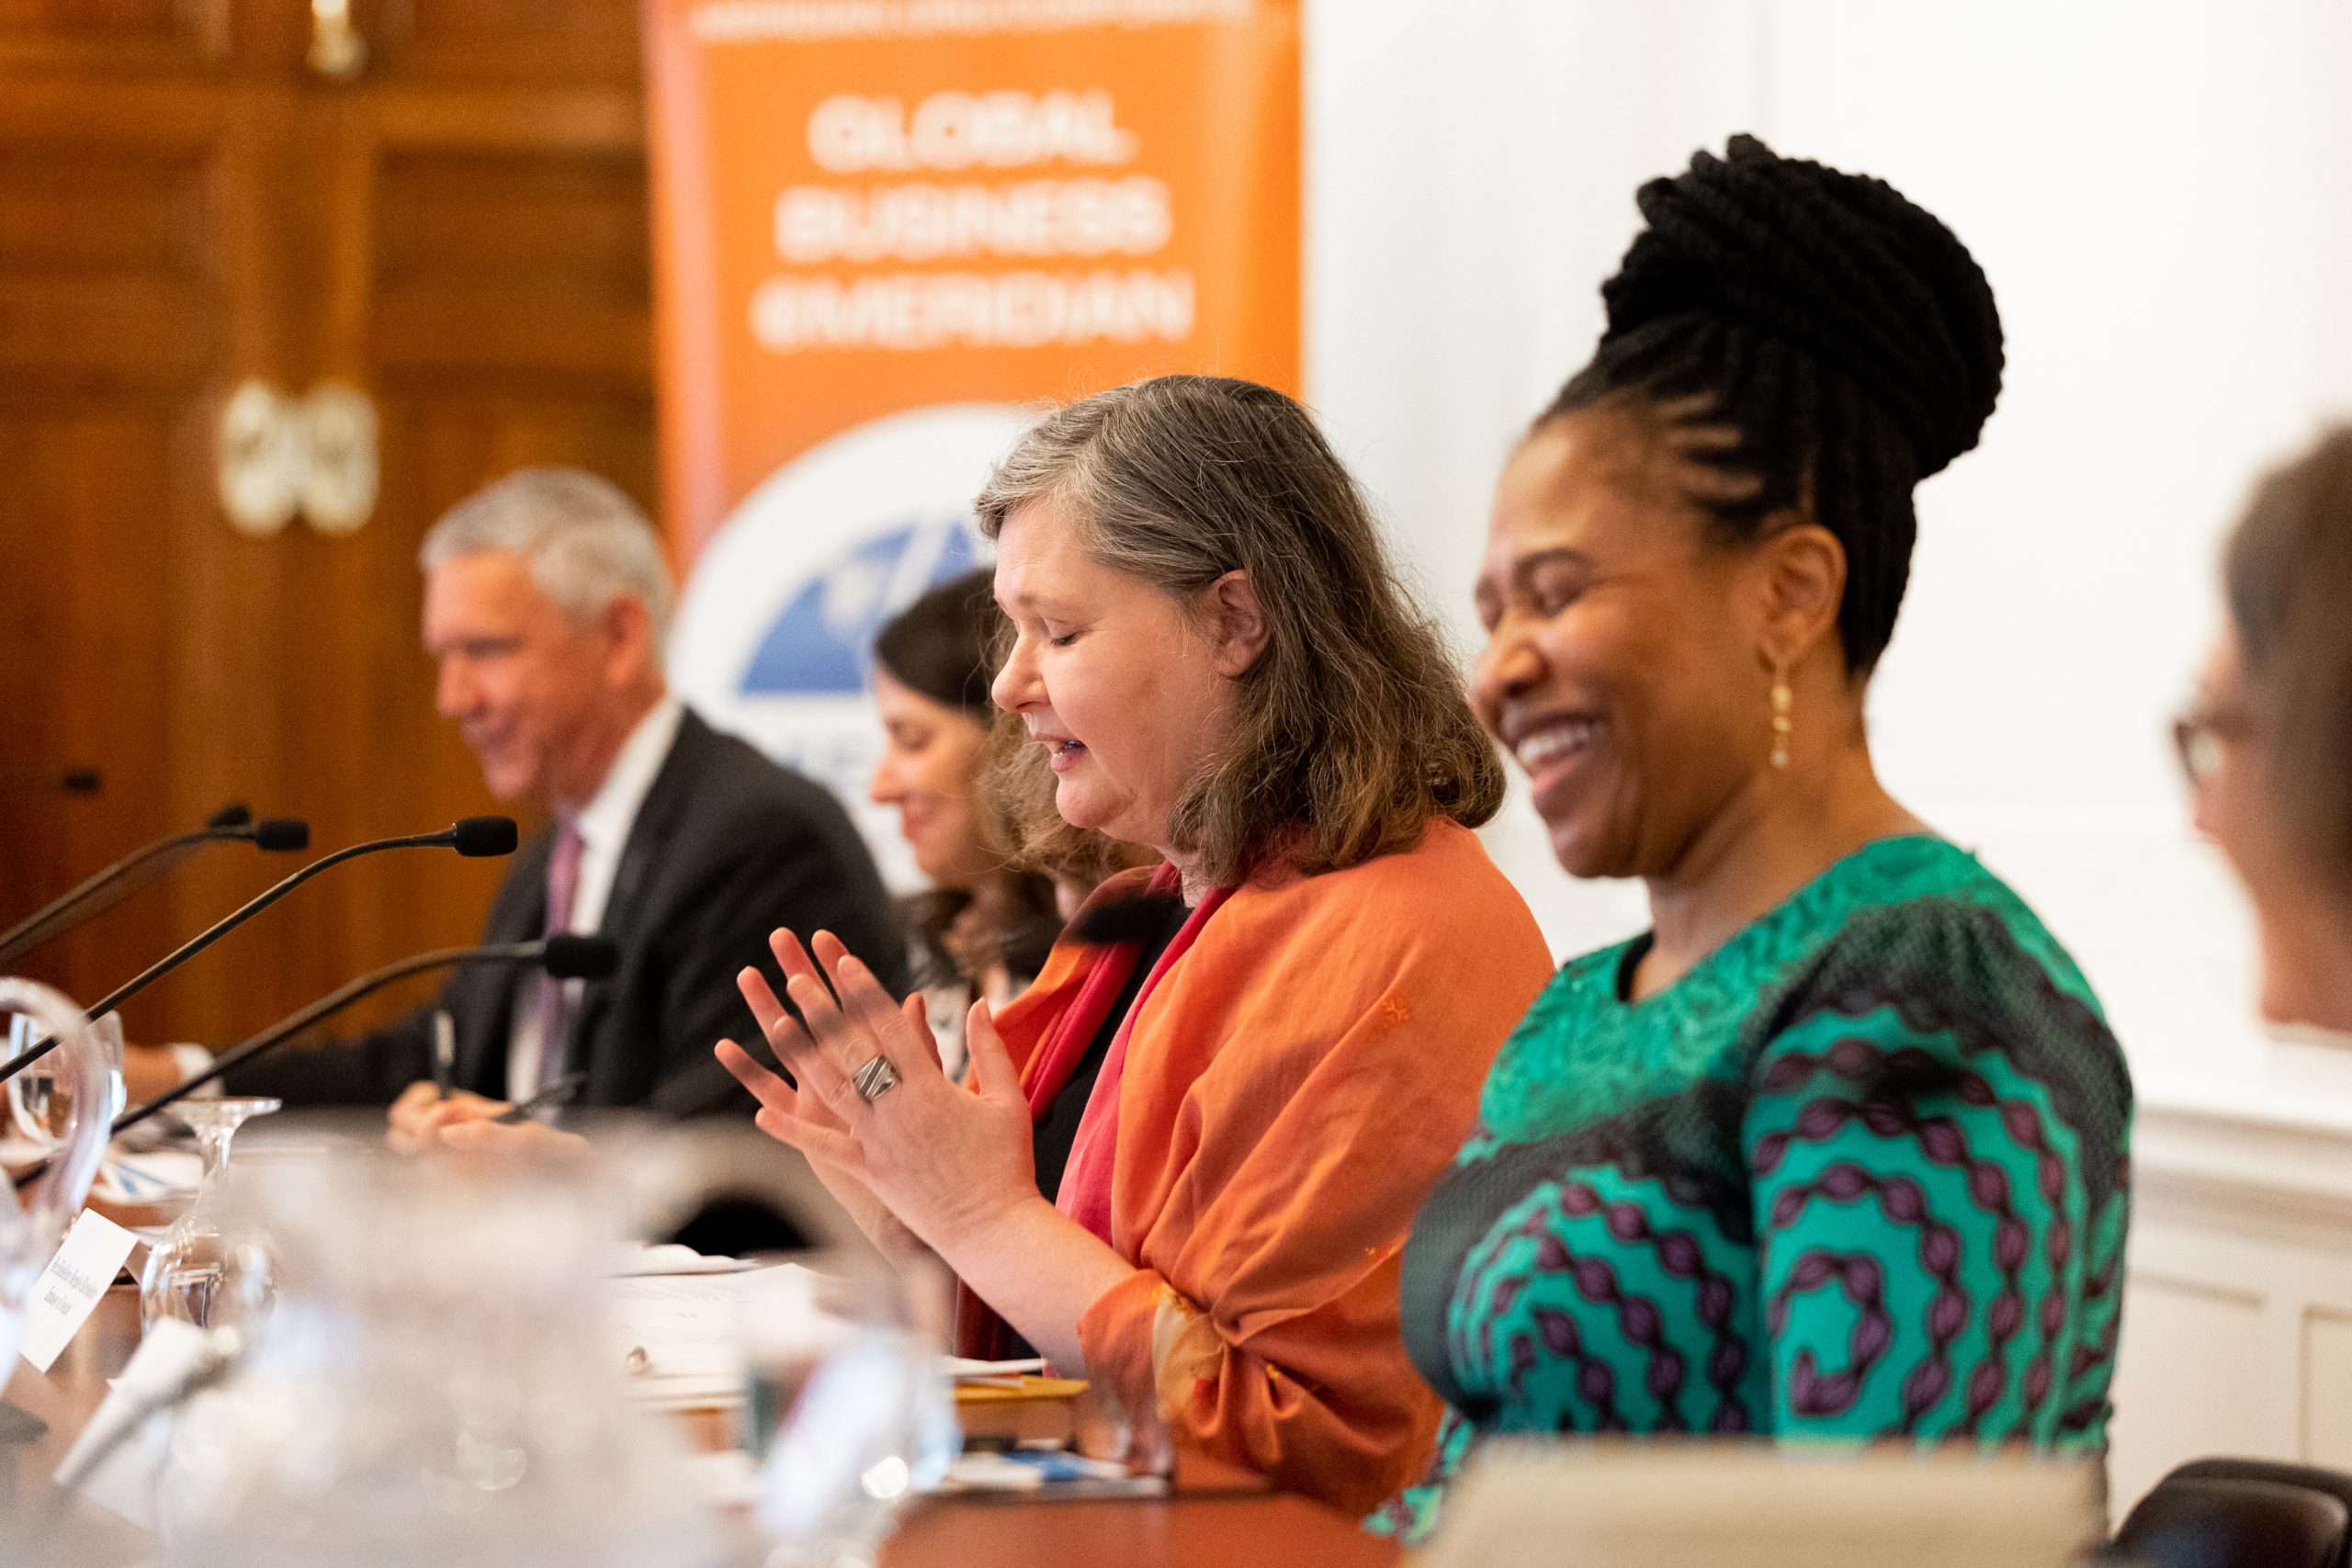 The Meridian Corporate Council hosted a hybrid conversation with Her Excellency Bergdís Ellertsdóttir, Ambassador of Iceland to the U.S., and Her Excellency Uzoma Emenike, Ambassador of Nigeria to the U.S., to discuss women’s health and its links to equity and sustainable development.